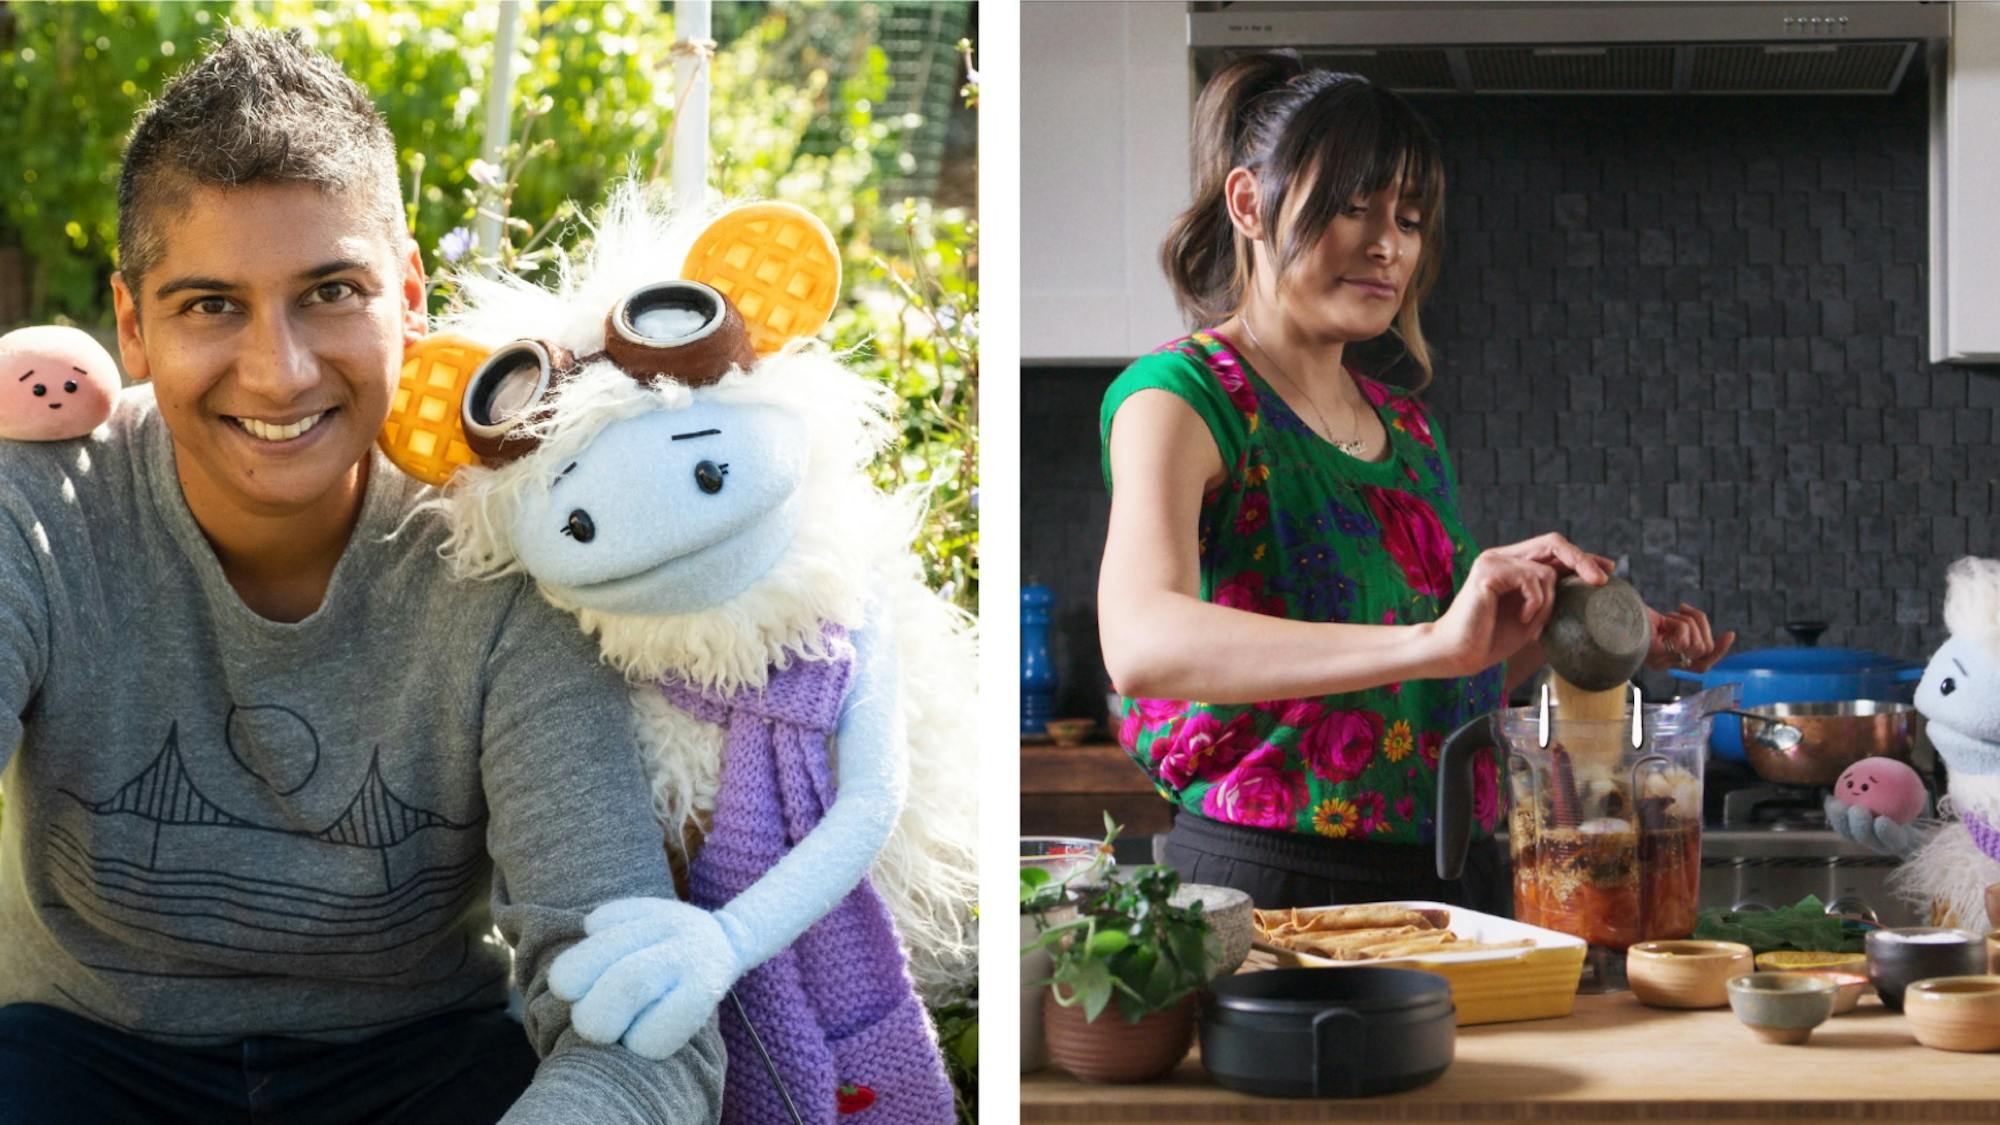 Two side-by-side images of Mistry and Lopez with the puppets. Mistry is posed in a green, outdoor setting, with Mochi on their shoulder and Waffles leaning affectionately on their arm. Lopez is pictured in her segment from the series, cooking mole coloradito with the puppets. She pours some ingredients into a blender, while Waffles and Mochi look on. 